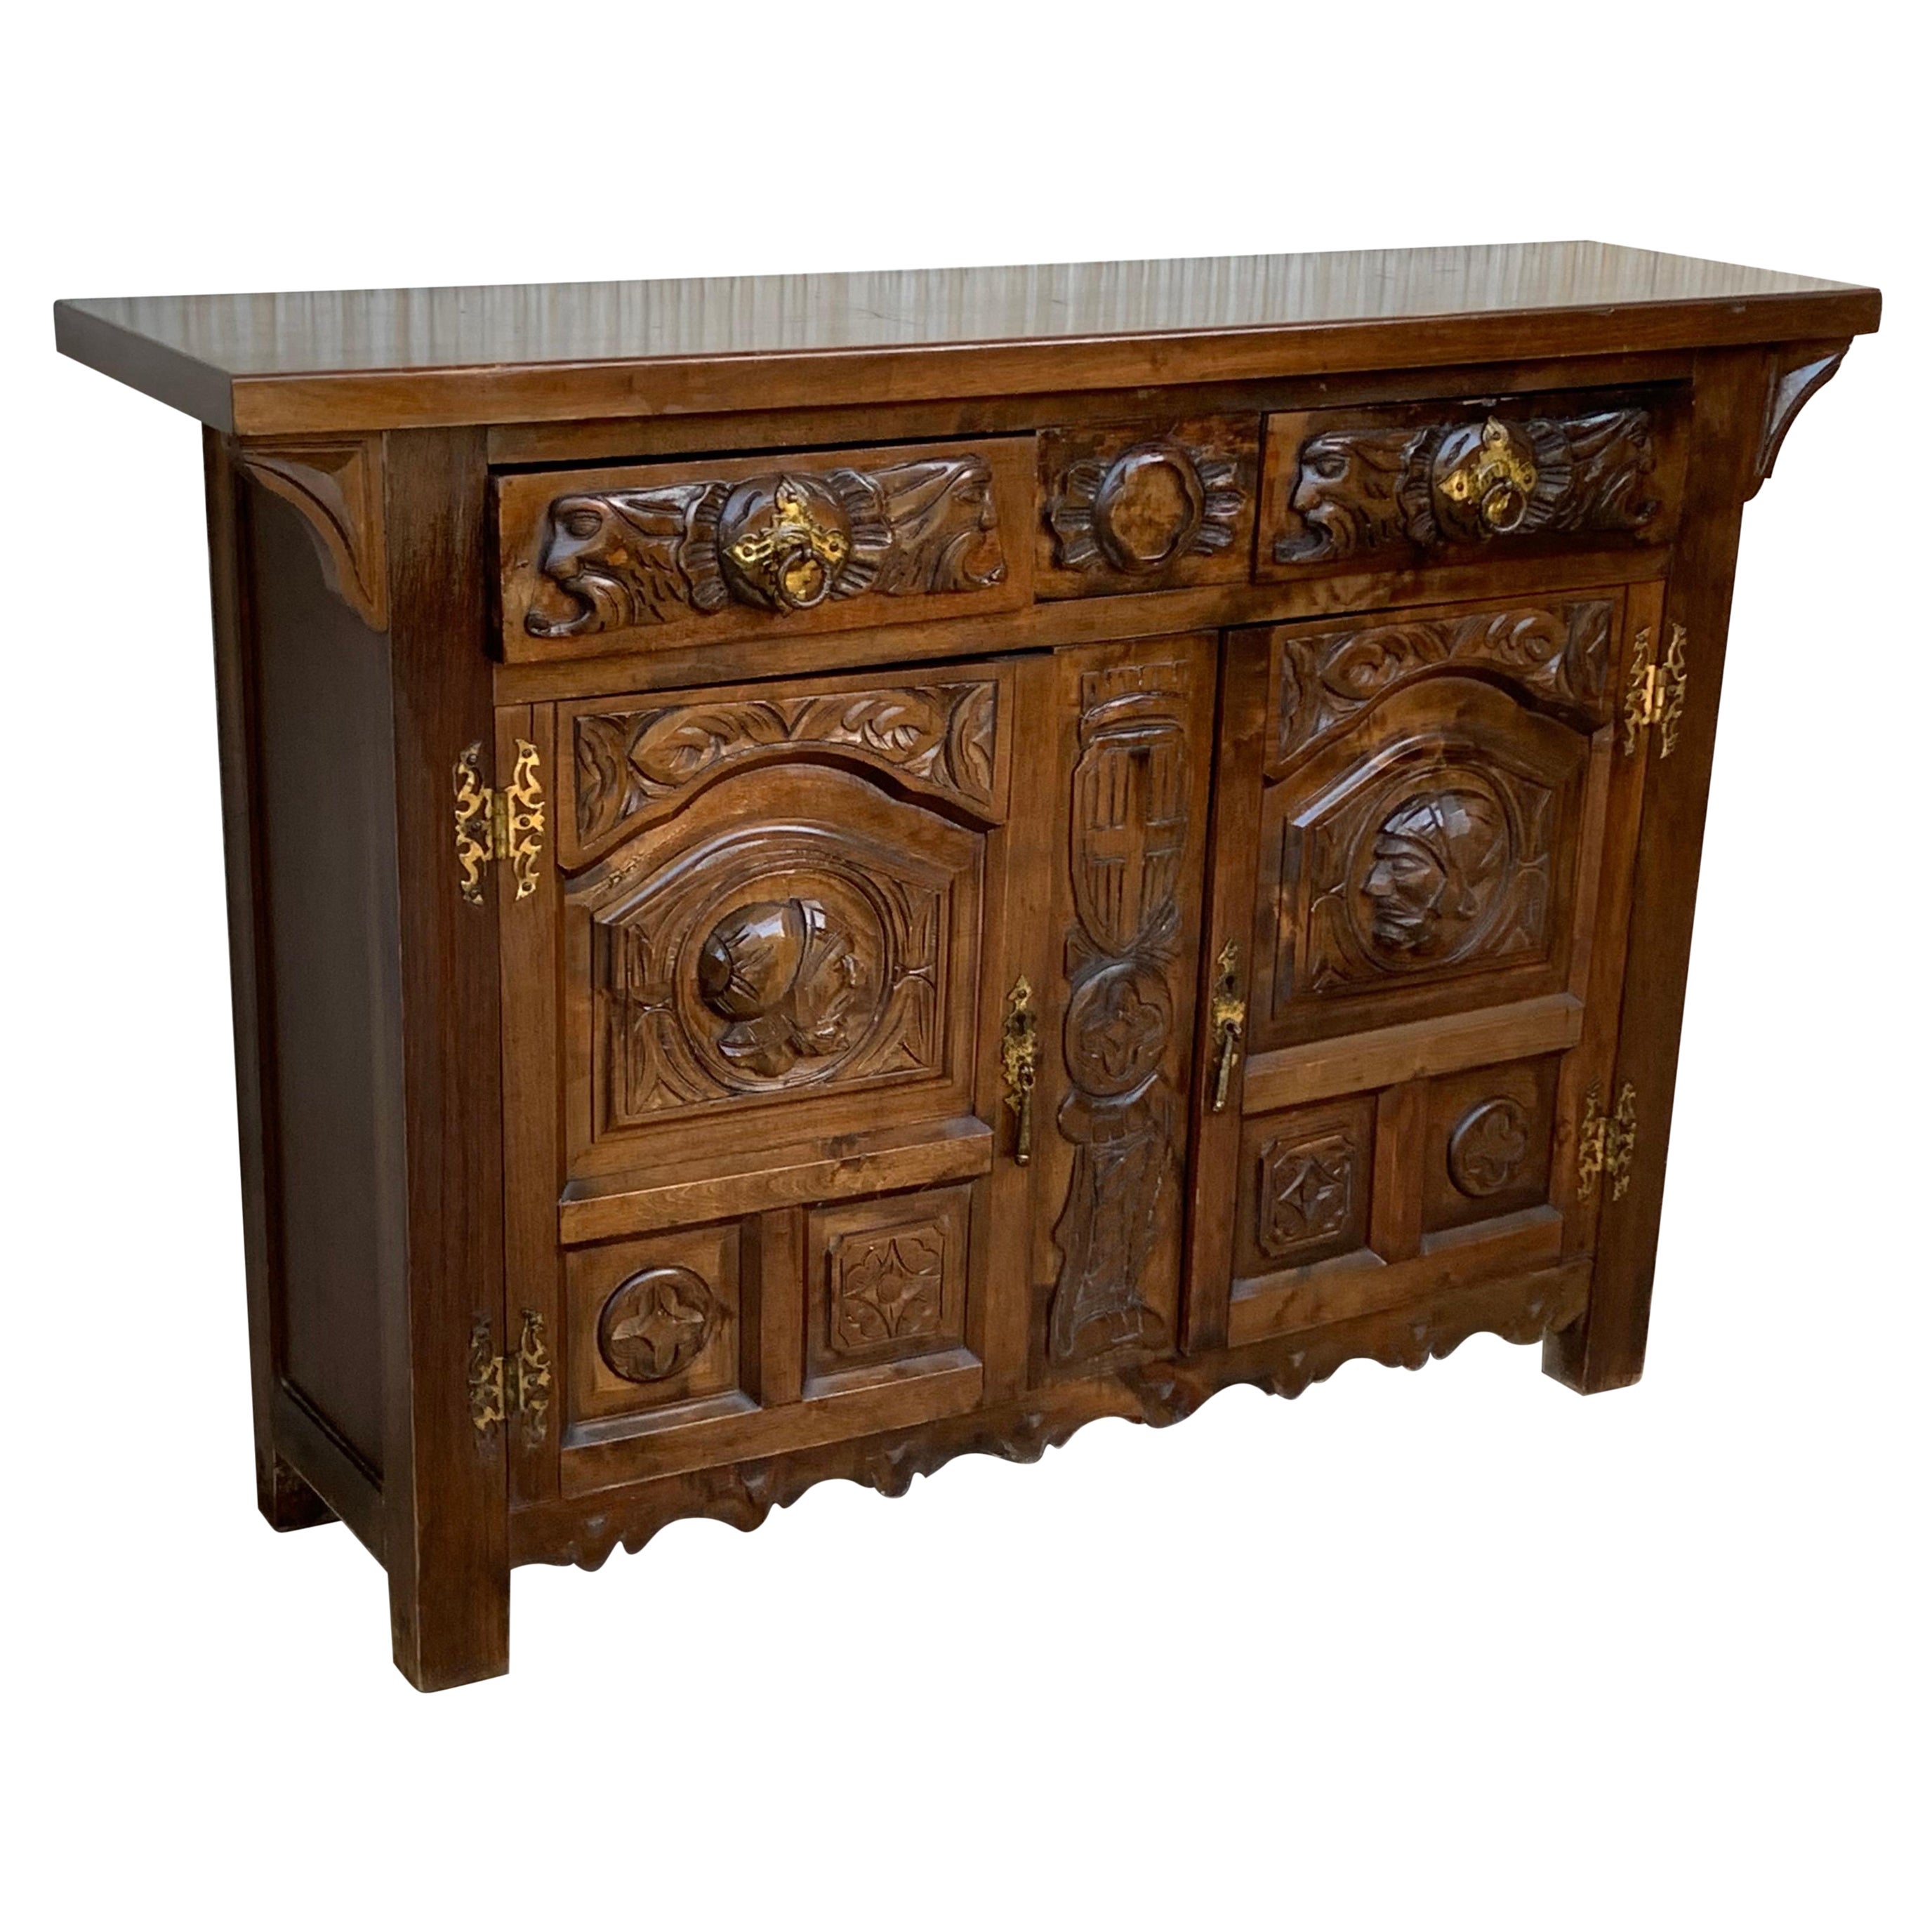 19th Catalan Spanish Hand Carved Cabinet with Two Doors and Two Drawers